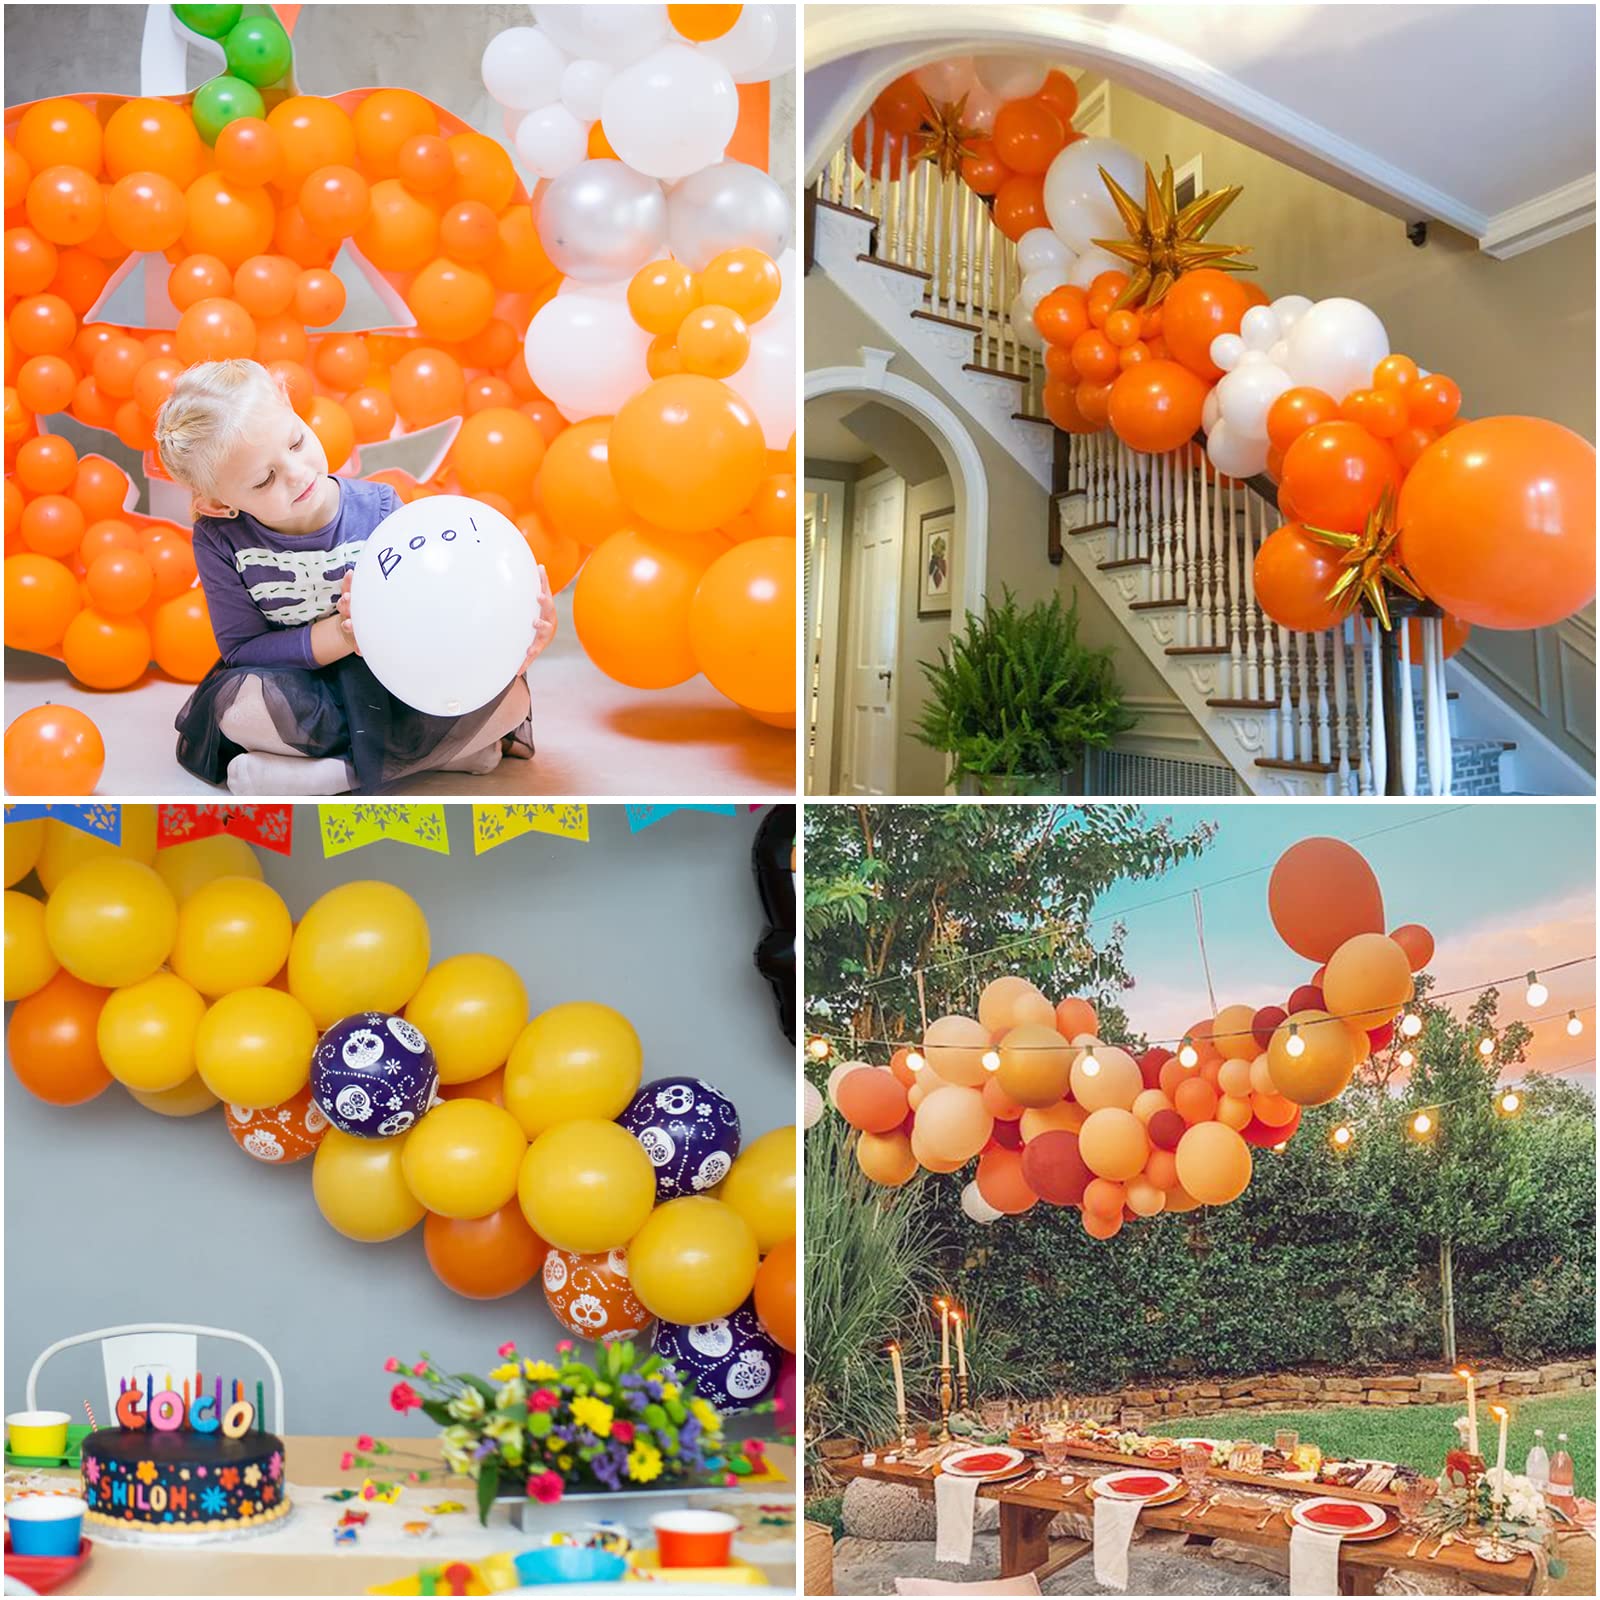 RUBFAC 129pcs Orange Balloons Different Sizes 18/12/10/5 Inches for Garland Arch, Burnt Orange Latex Balloons for Birthday Party Baby Shower Decoration